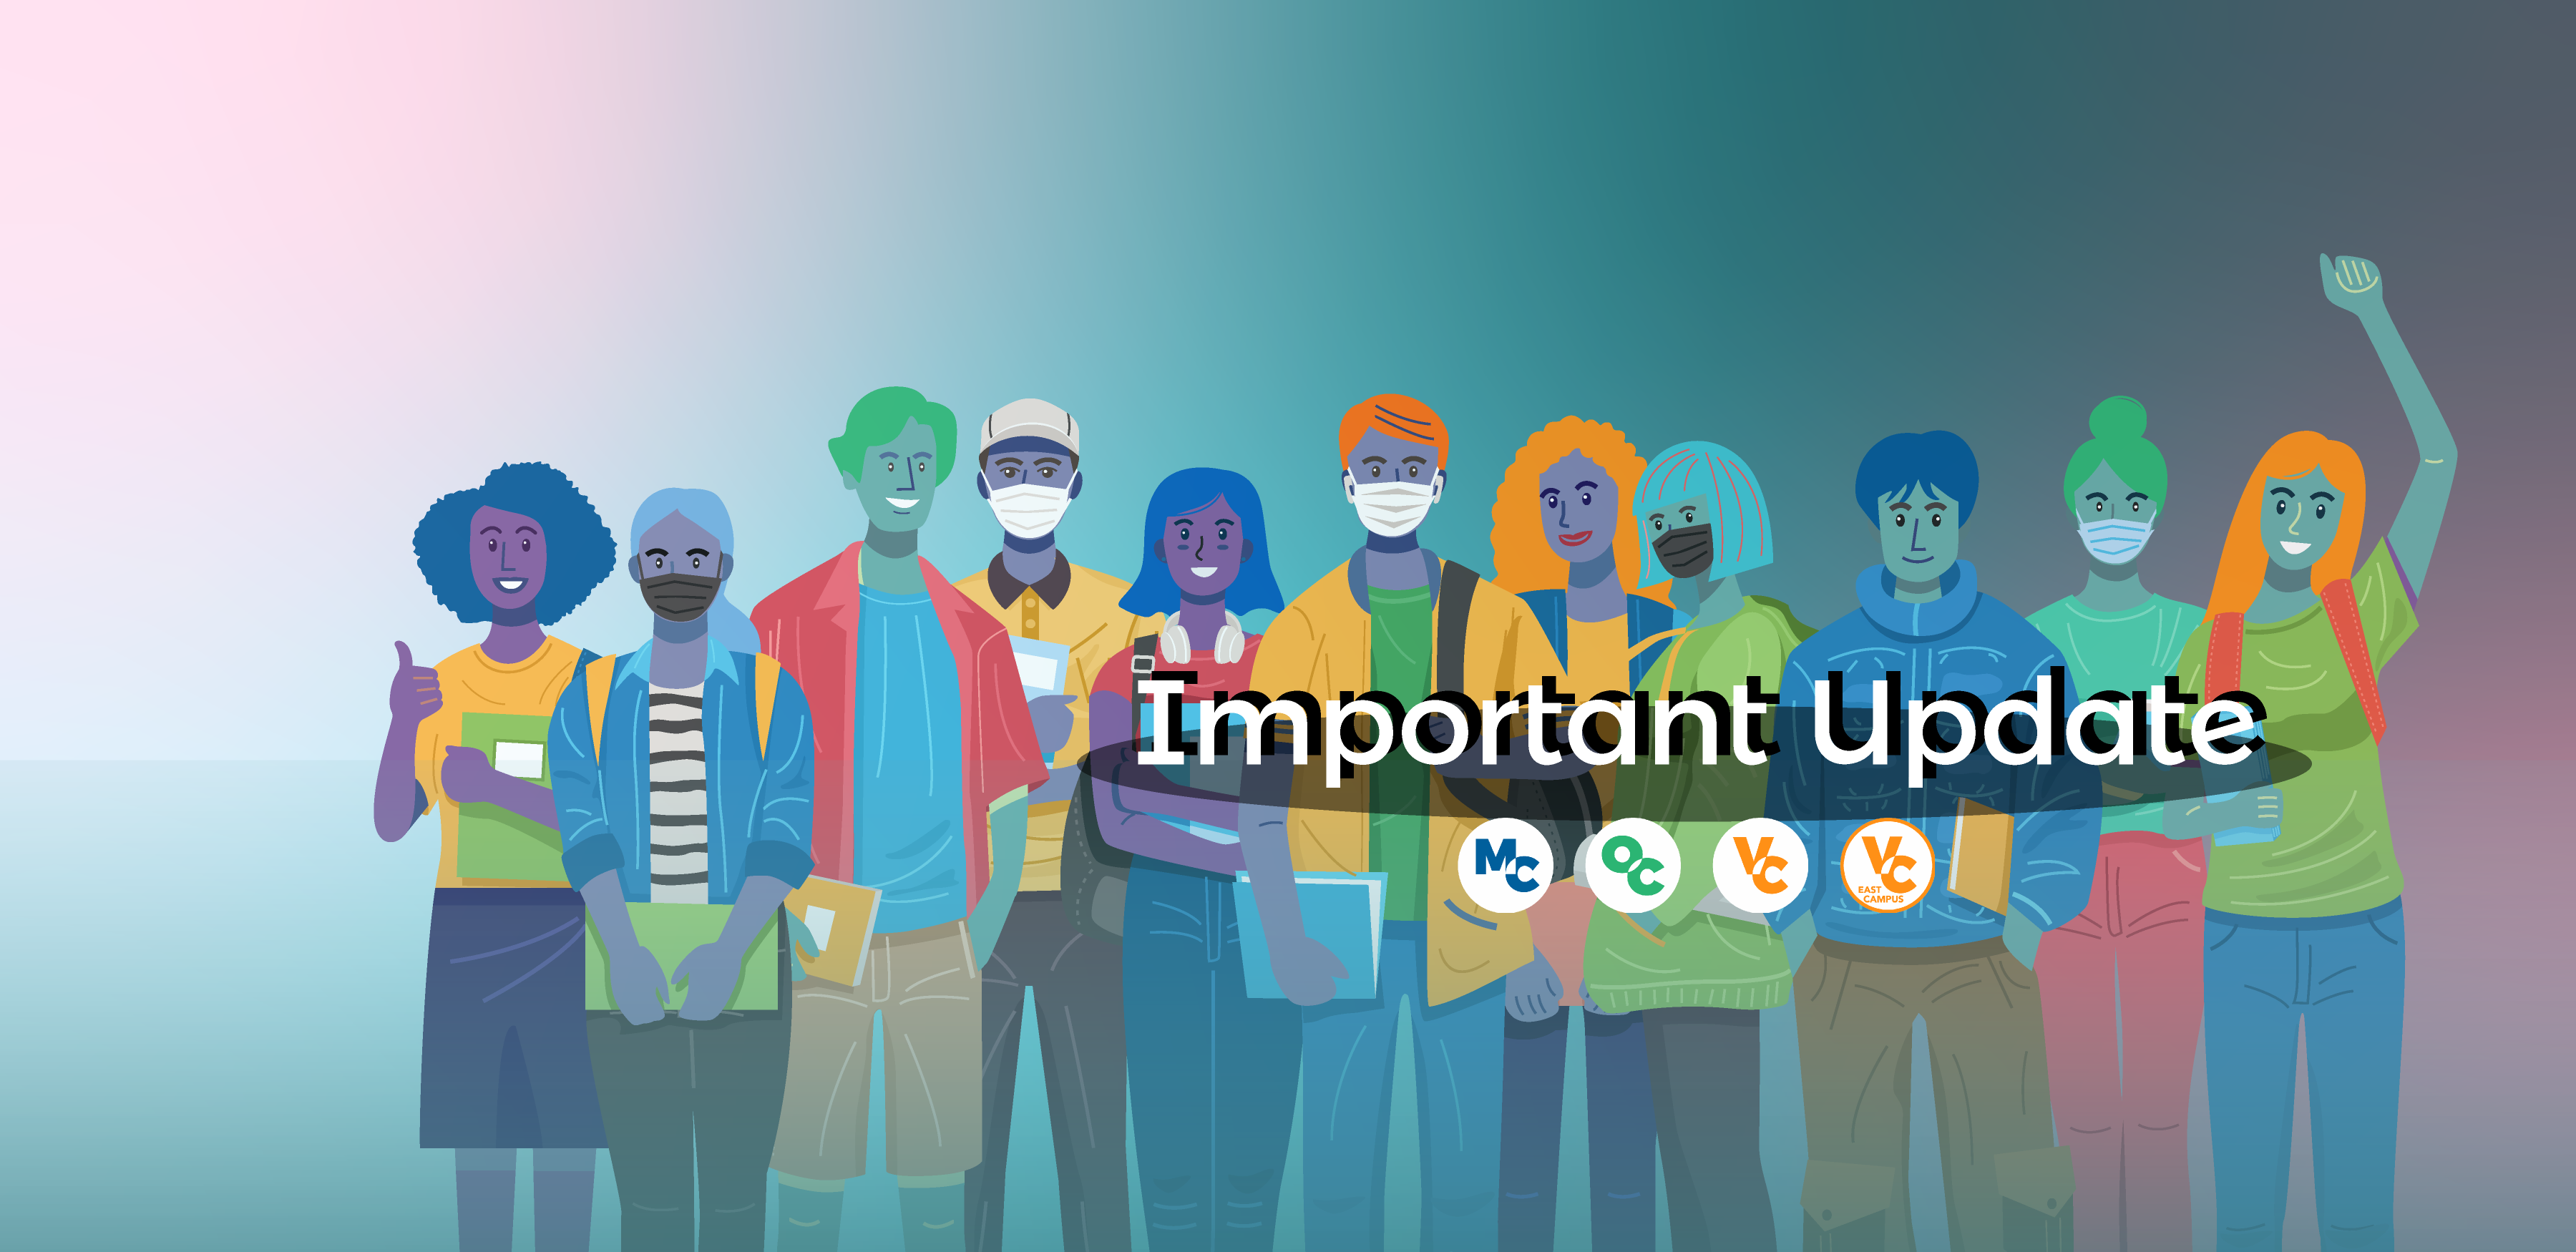 Illustrated people, some wearing masks and others without masks. Text that reads: Important Update.